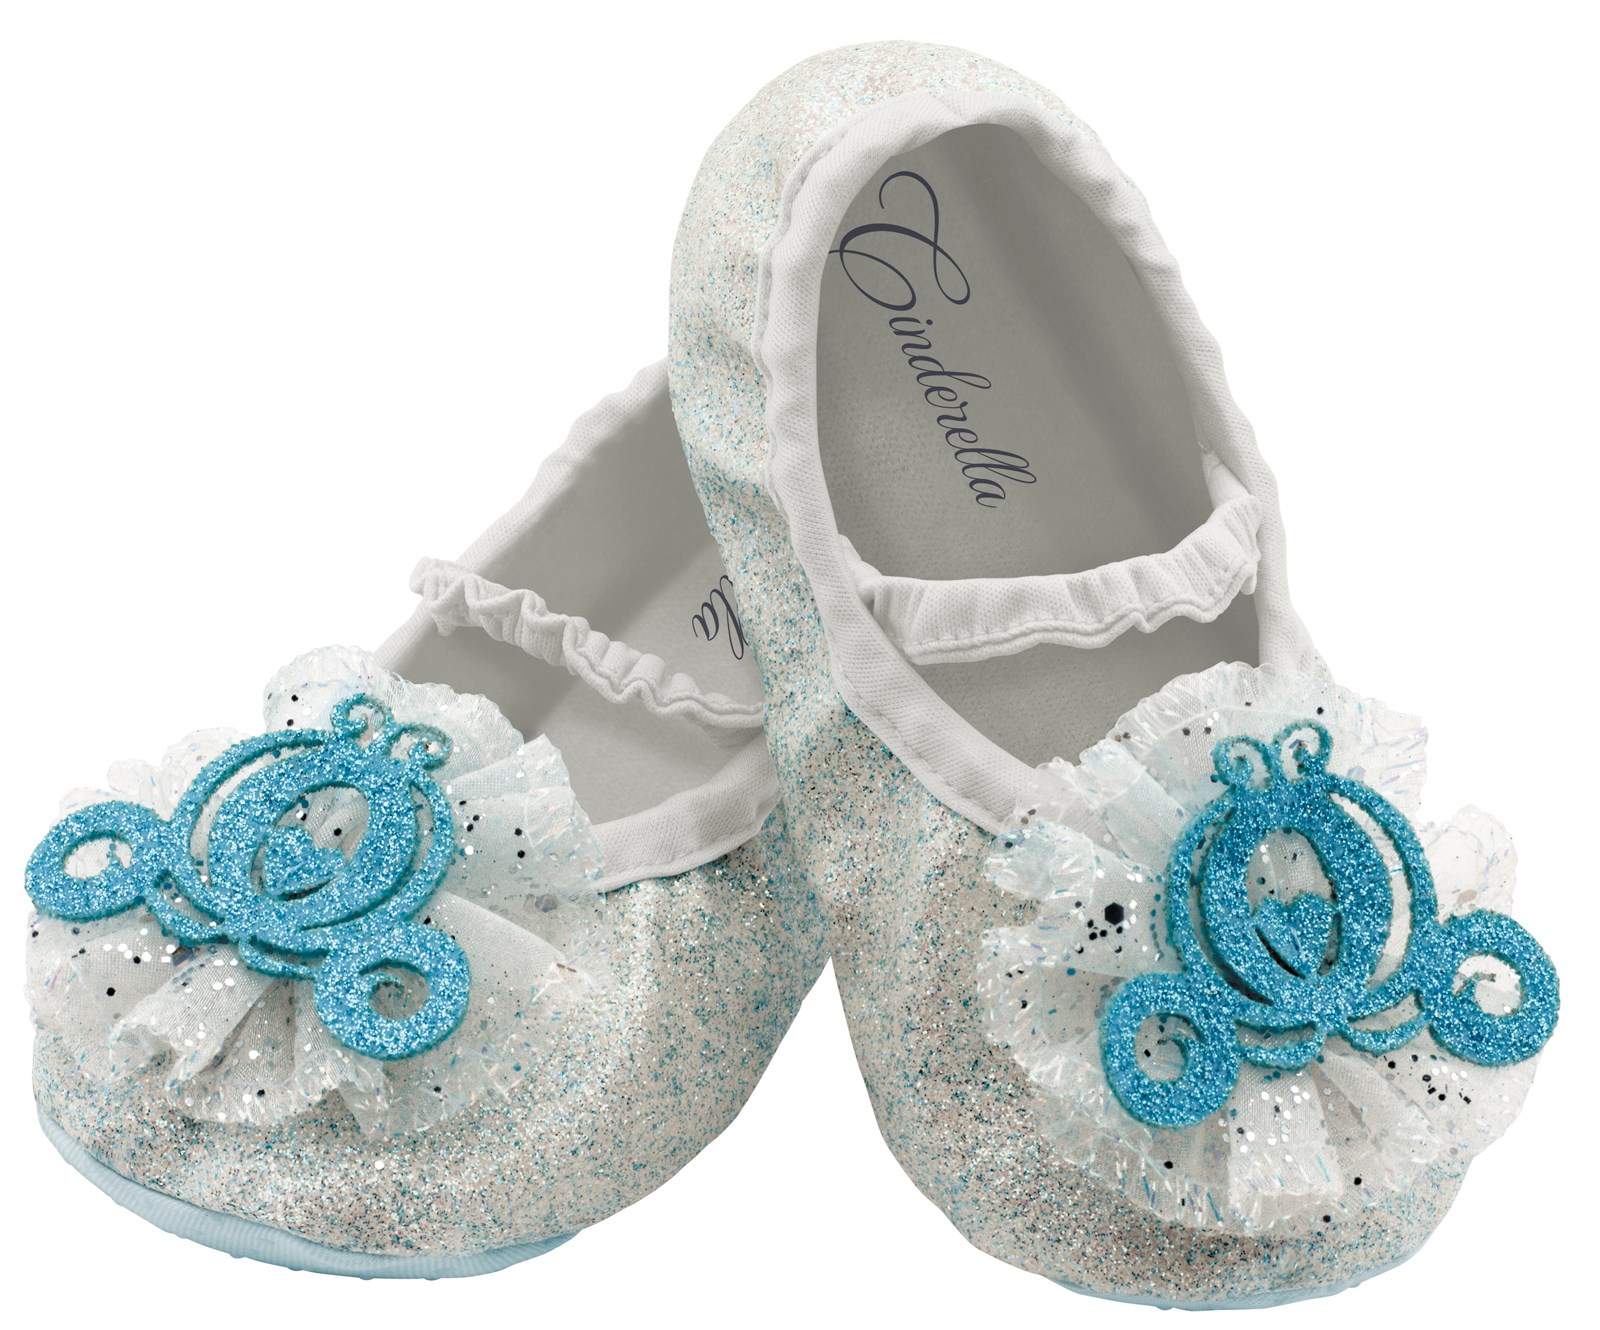 Disney Princess Cinderella Slippers For Toddlers